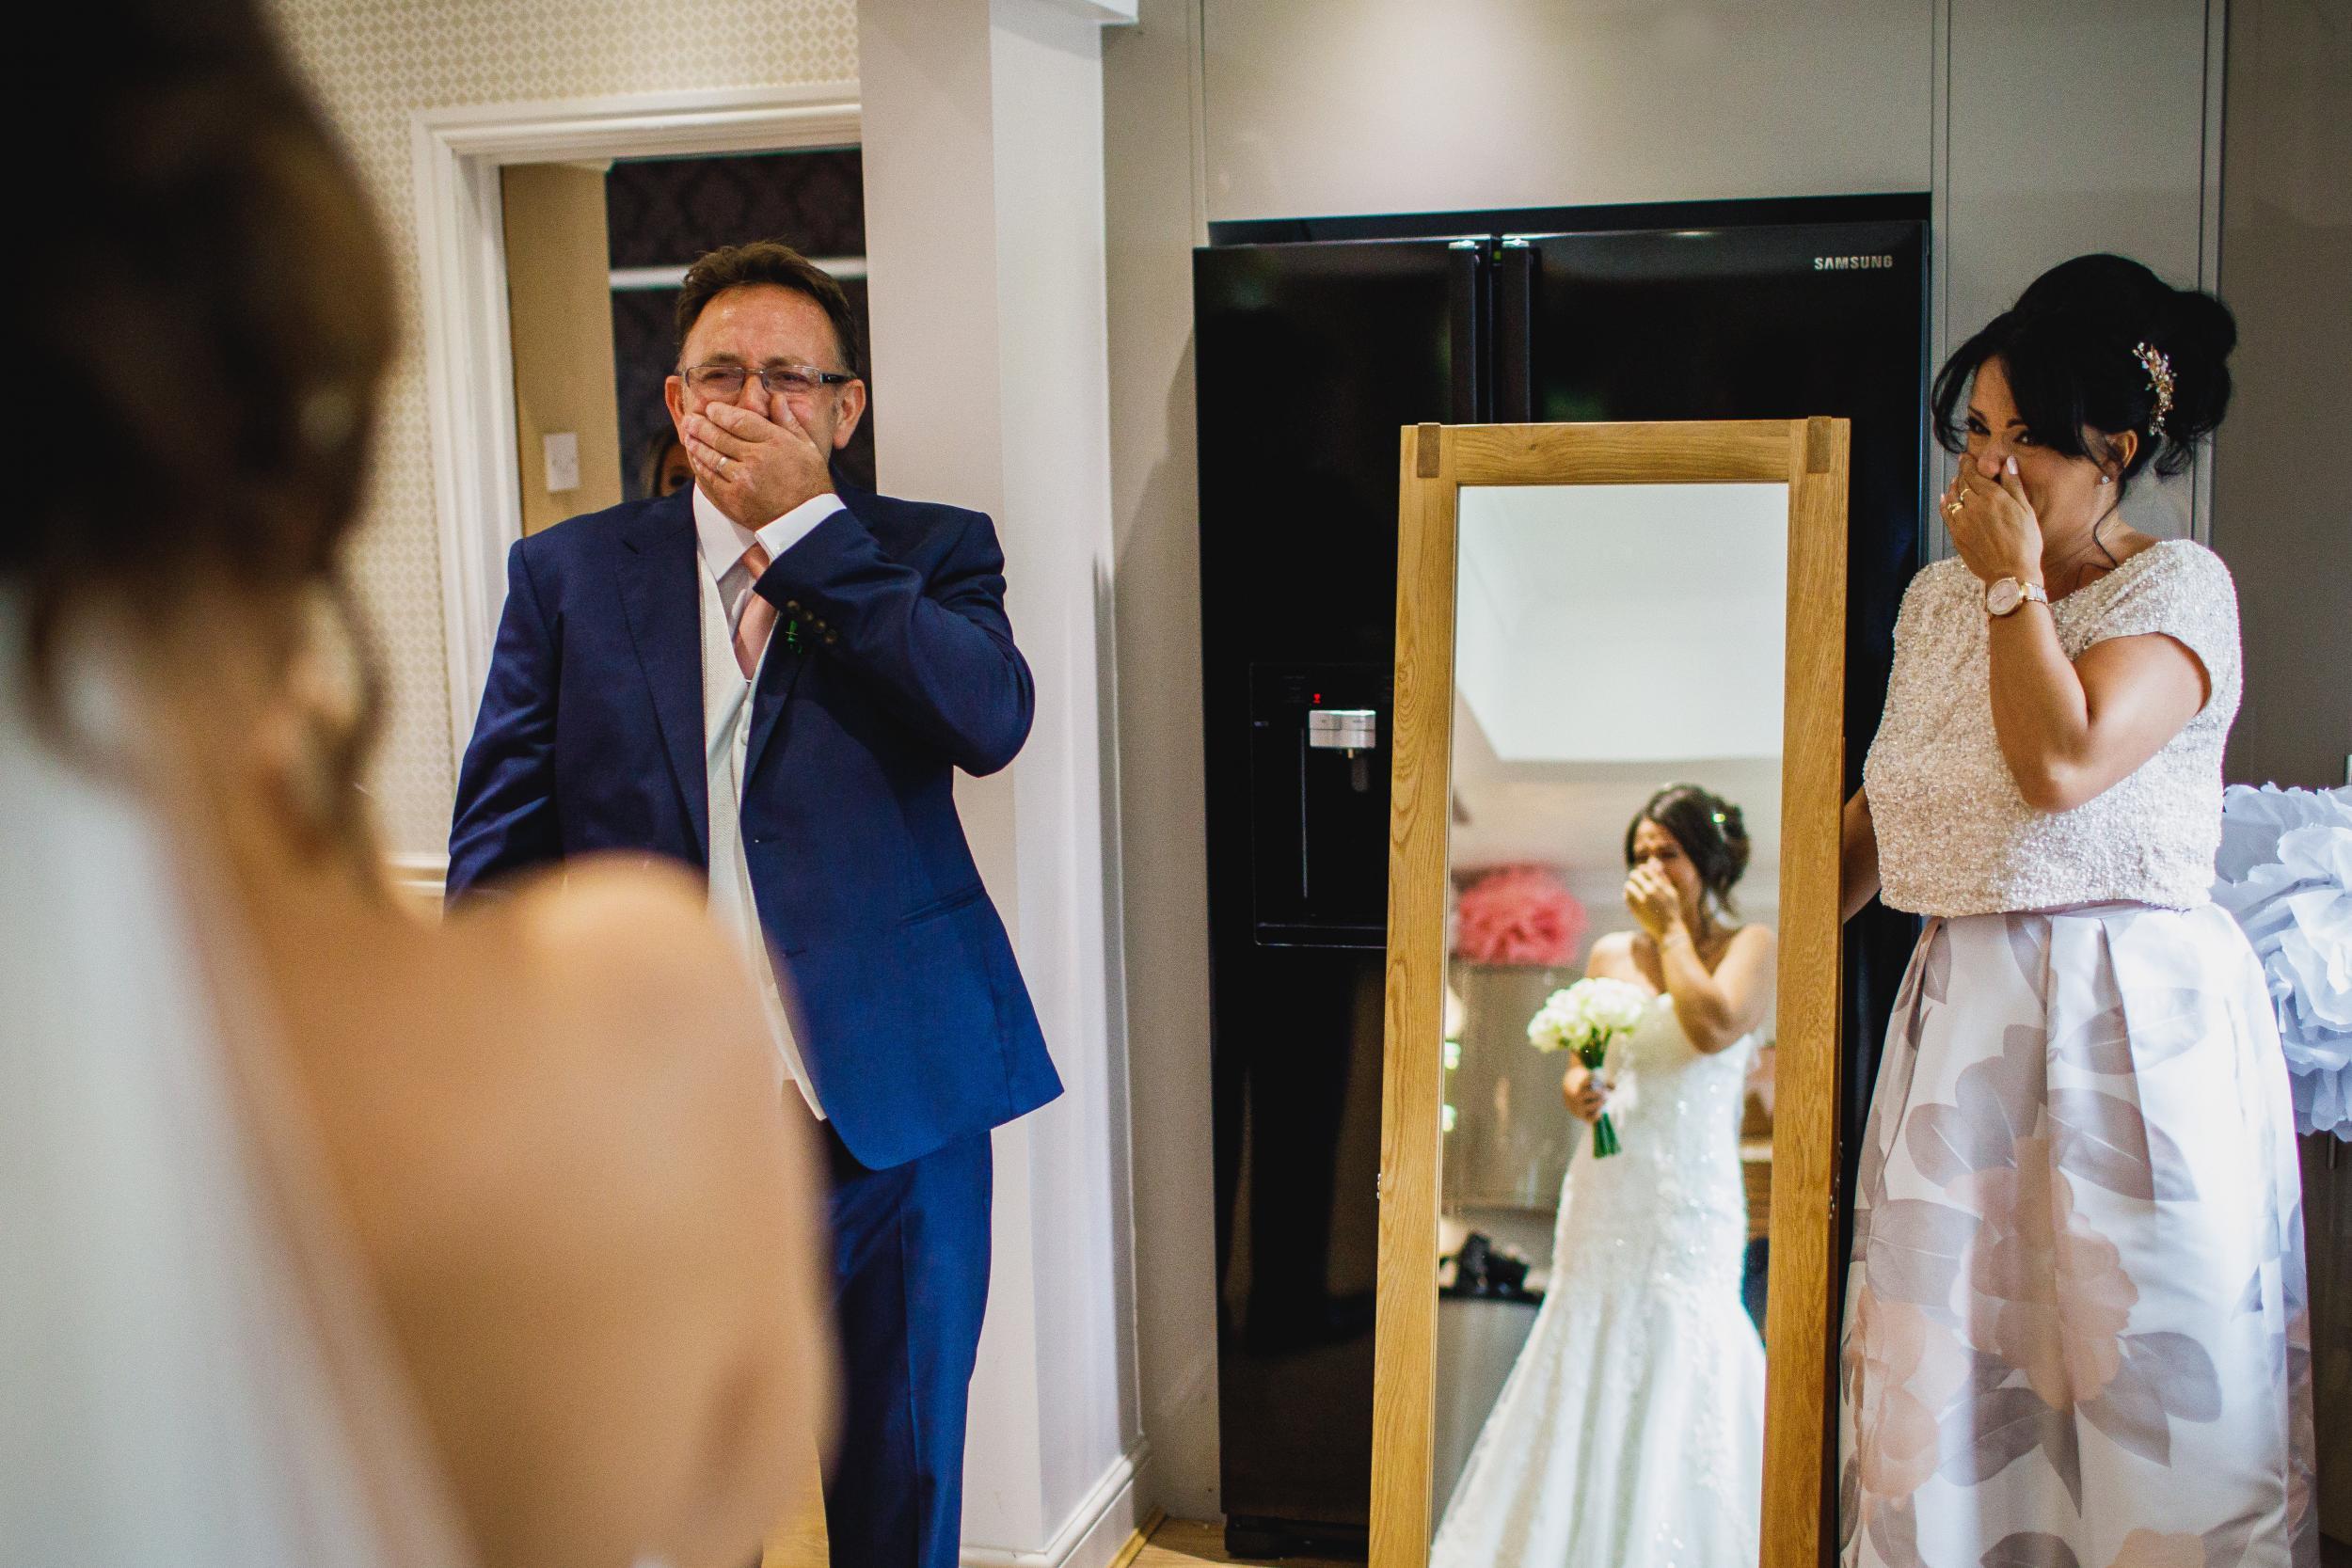 The emotional image won a Masters of Wedding Photography award for its moving message